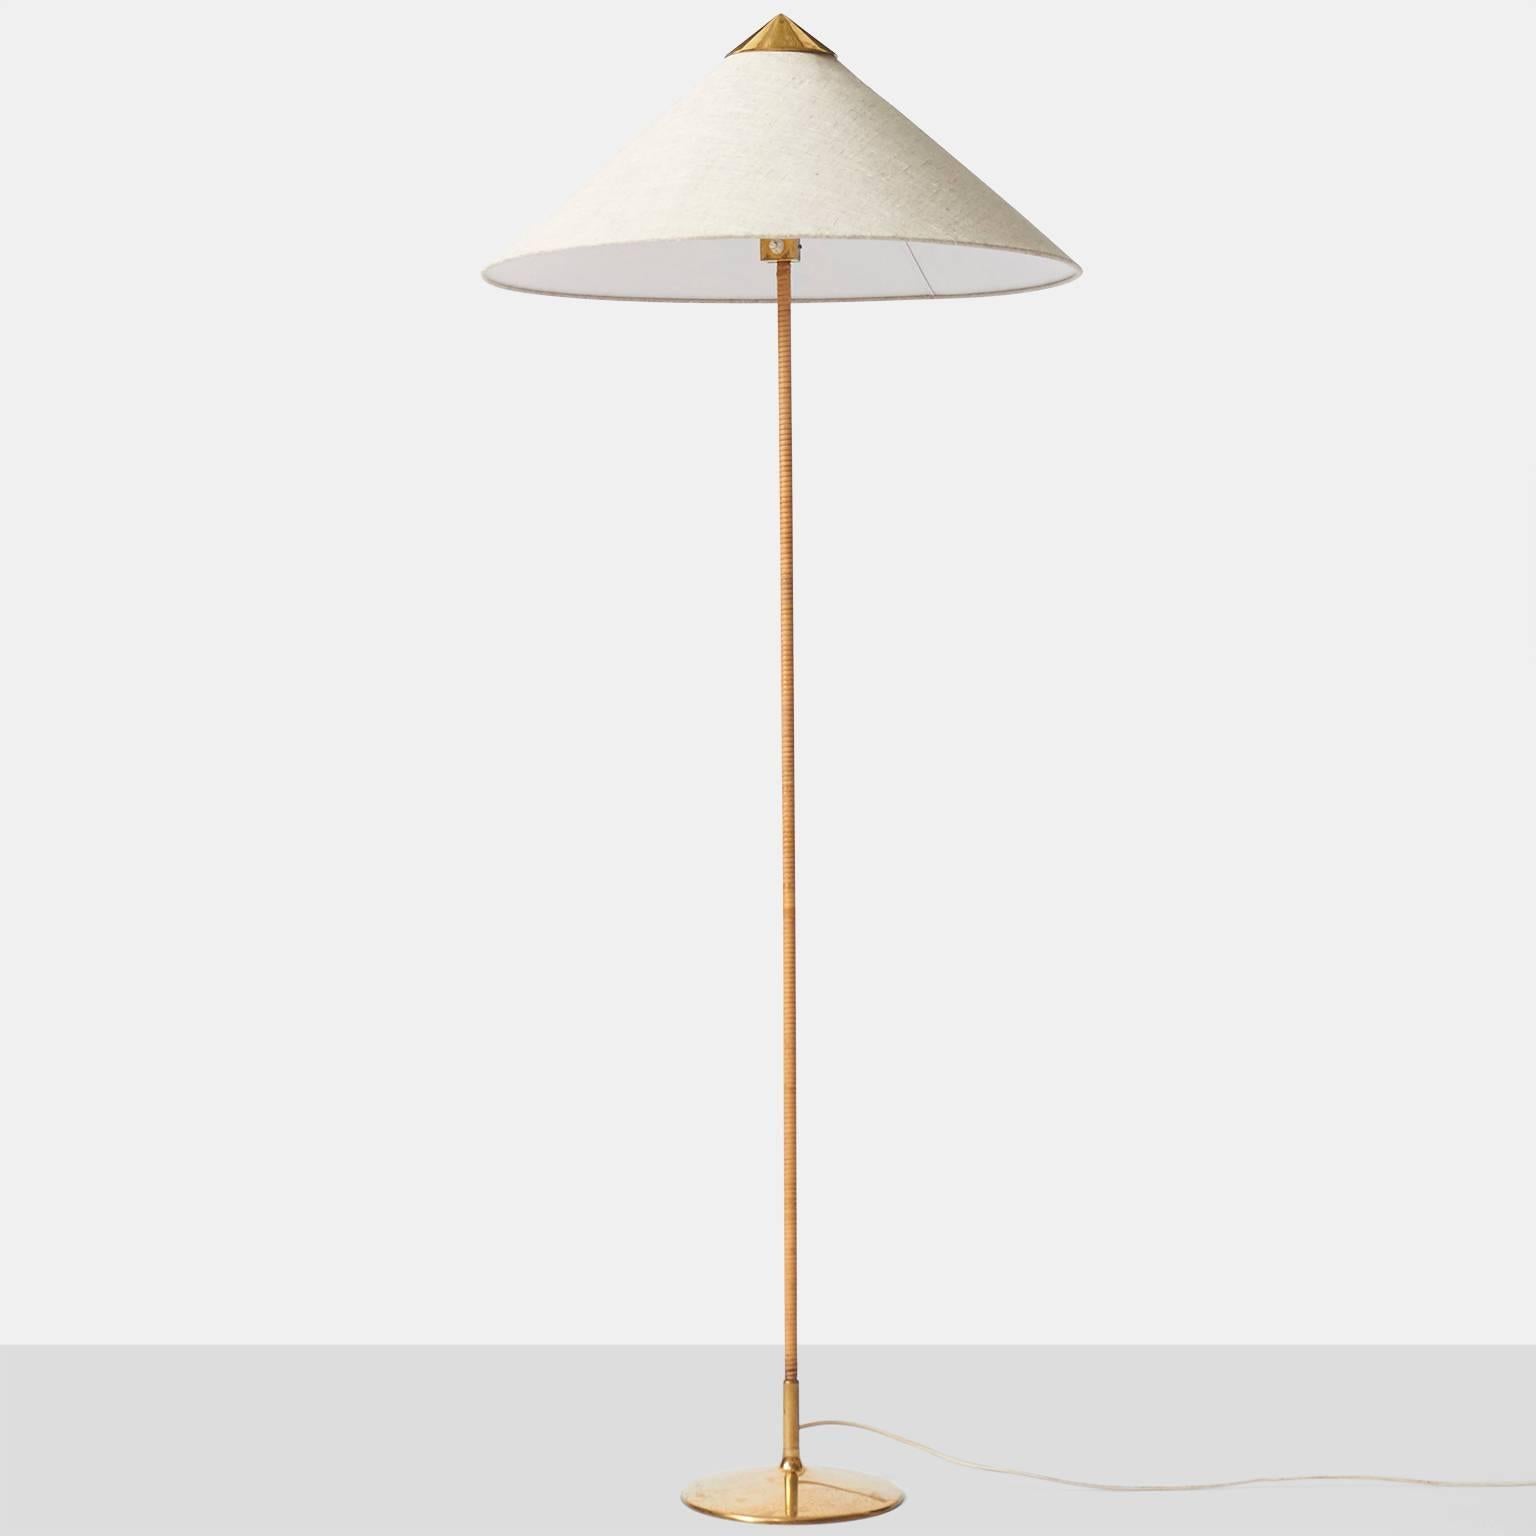 A floor lamp model #9602 by Paavo Tynell for Taito Oy, Finland, circa 1950. The lamp is in brass with the stem wrapped in cane. The 